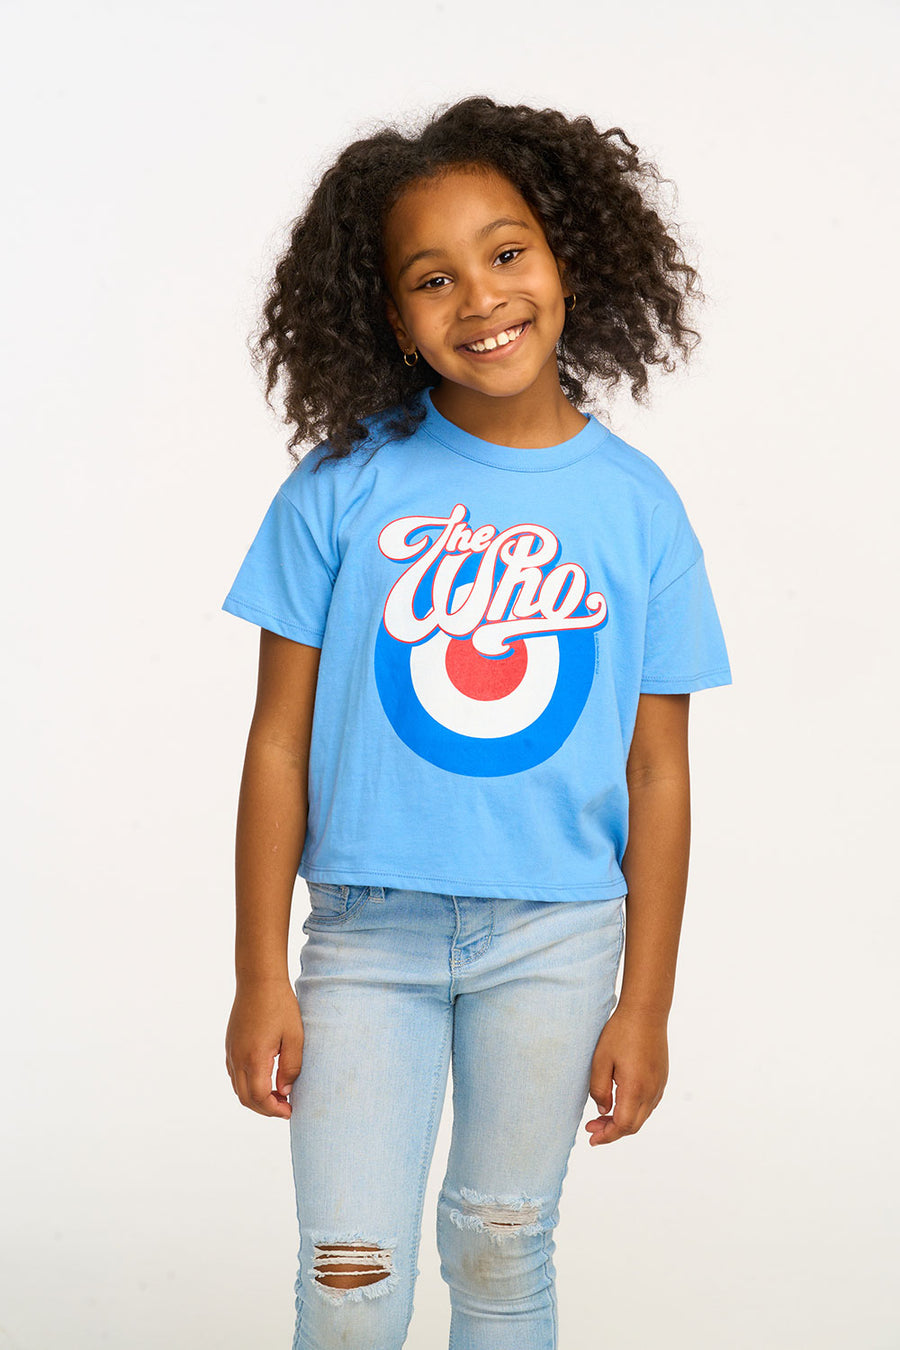 The Who Target Logo Tee GIRLS chaserbrand